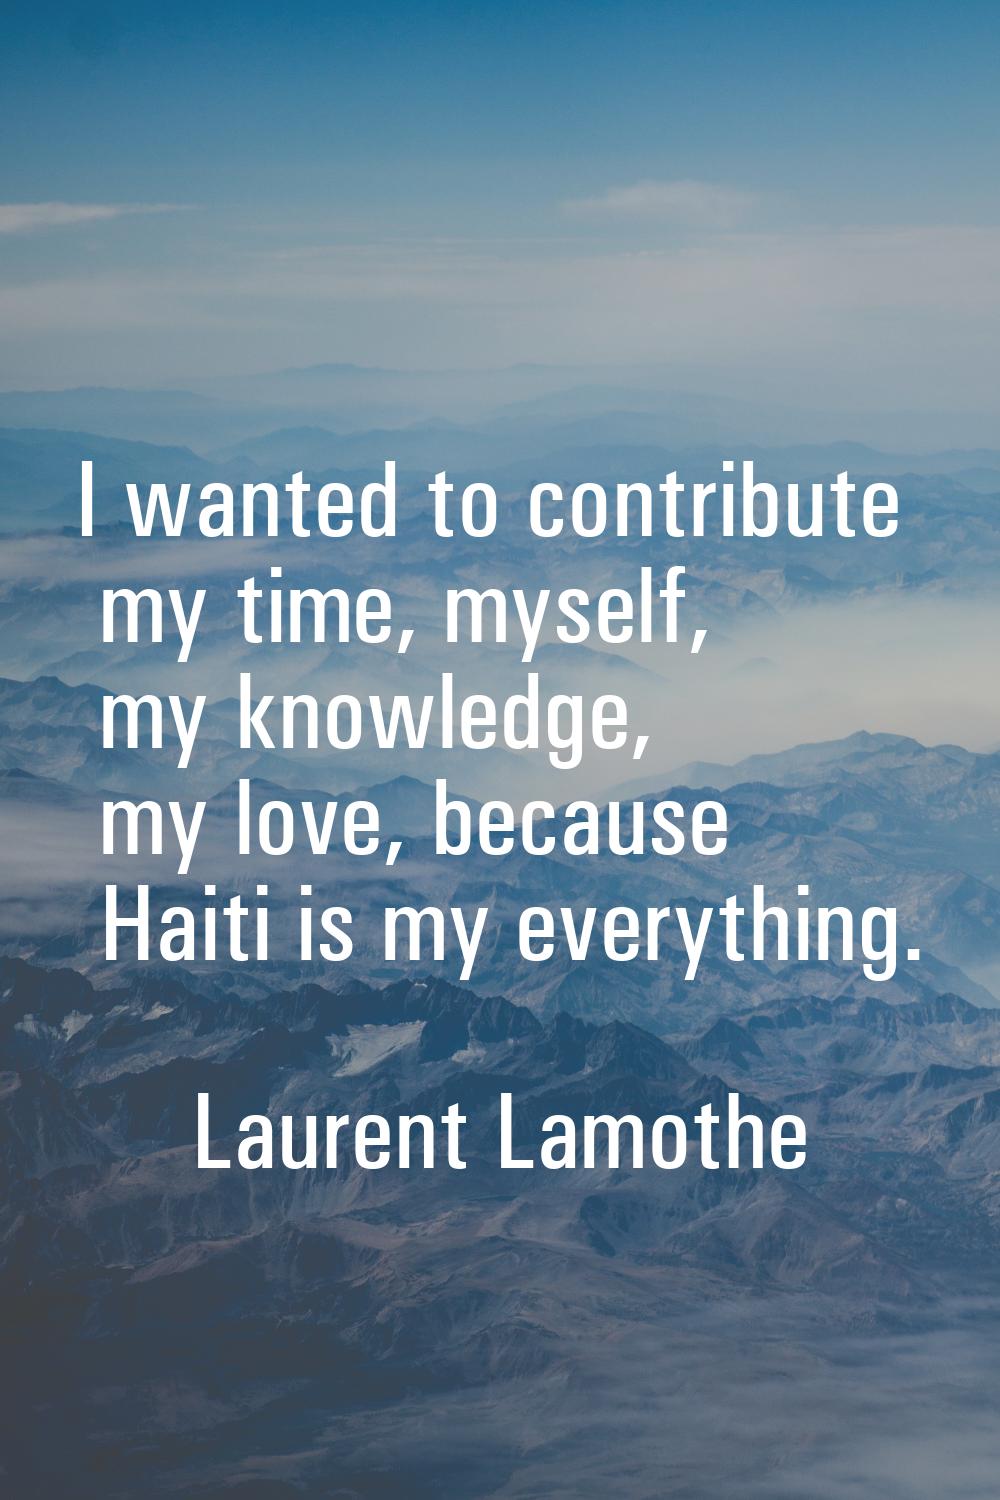 I wanted to contribute my time, myself, my knowledge, my love, because Haiti is my everything.